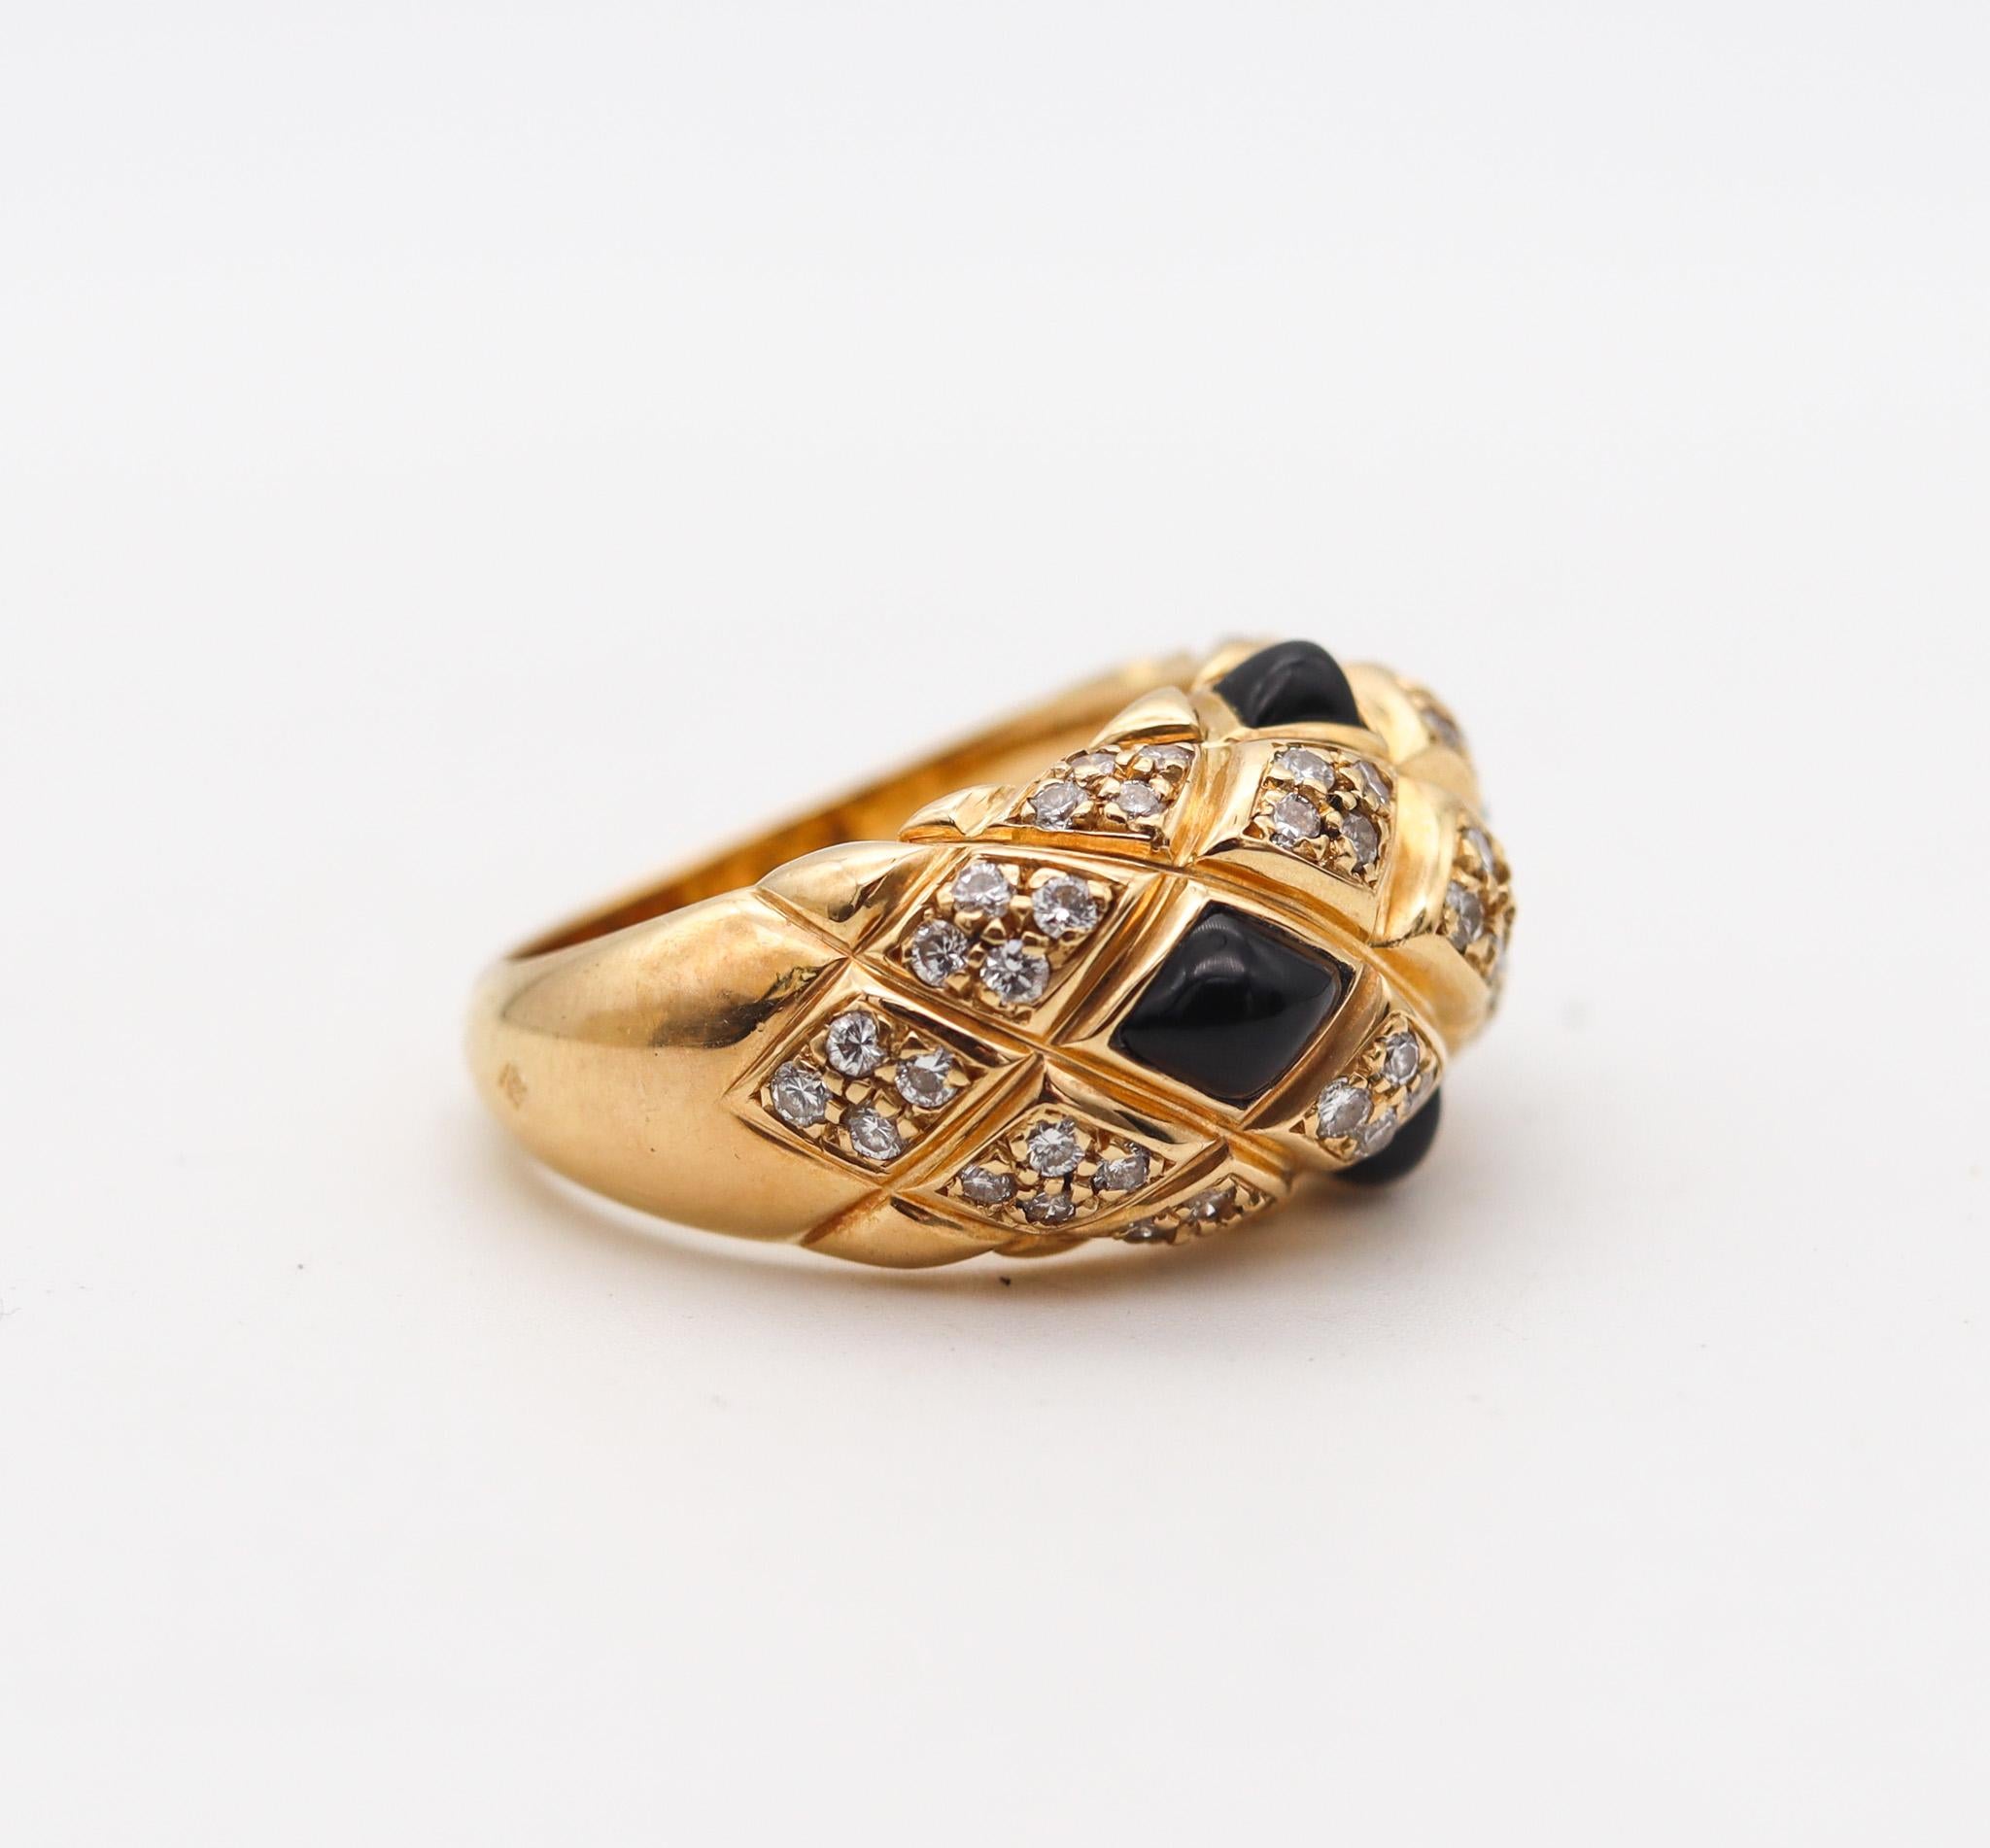 Brilliant Cut Chaumet Paris Quilted Cocktail Ring In 18Kt Gold With 1.72 Ctw Diamonds And Onyx For Sale